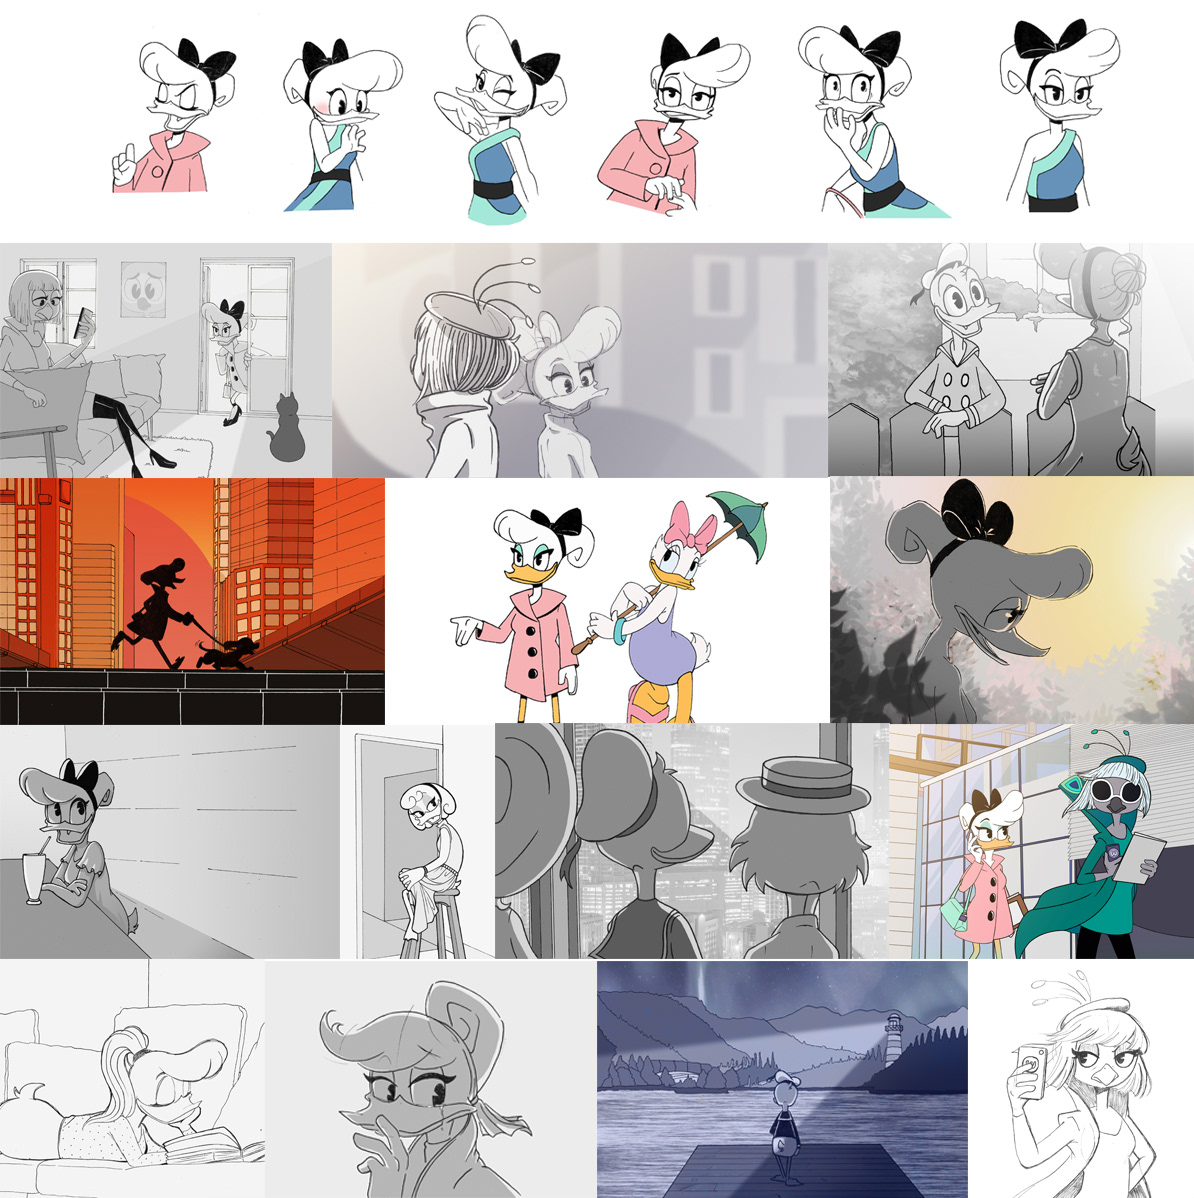 Fan Concept Art Reel starring Daisy Duck, along with other DuckTales charac...